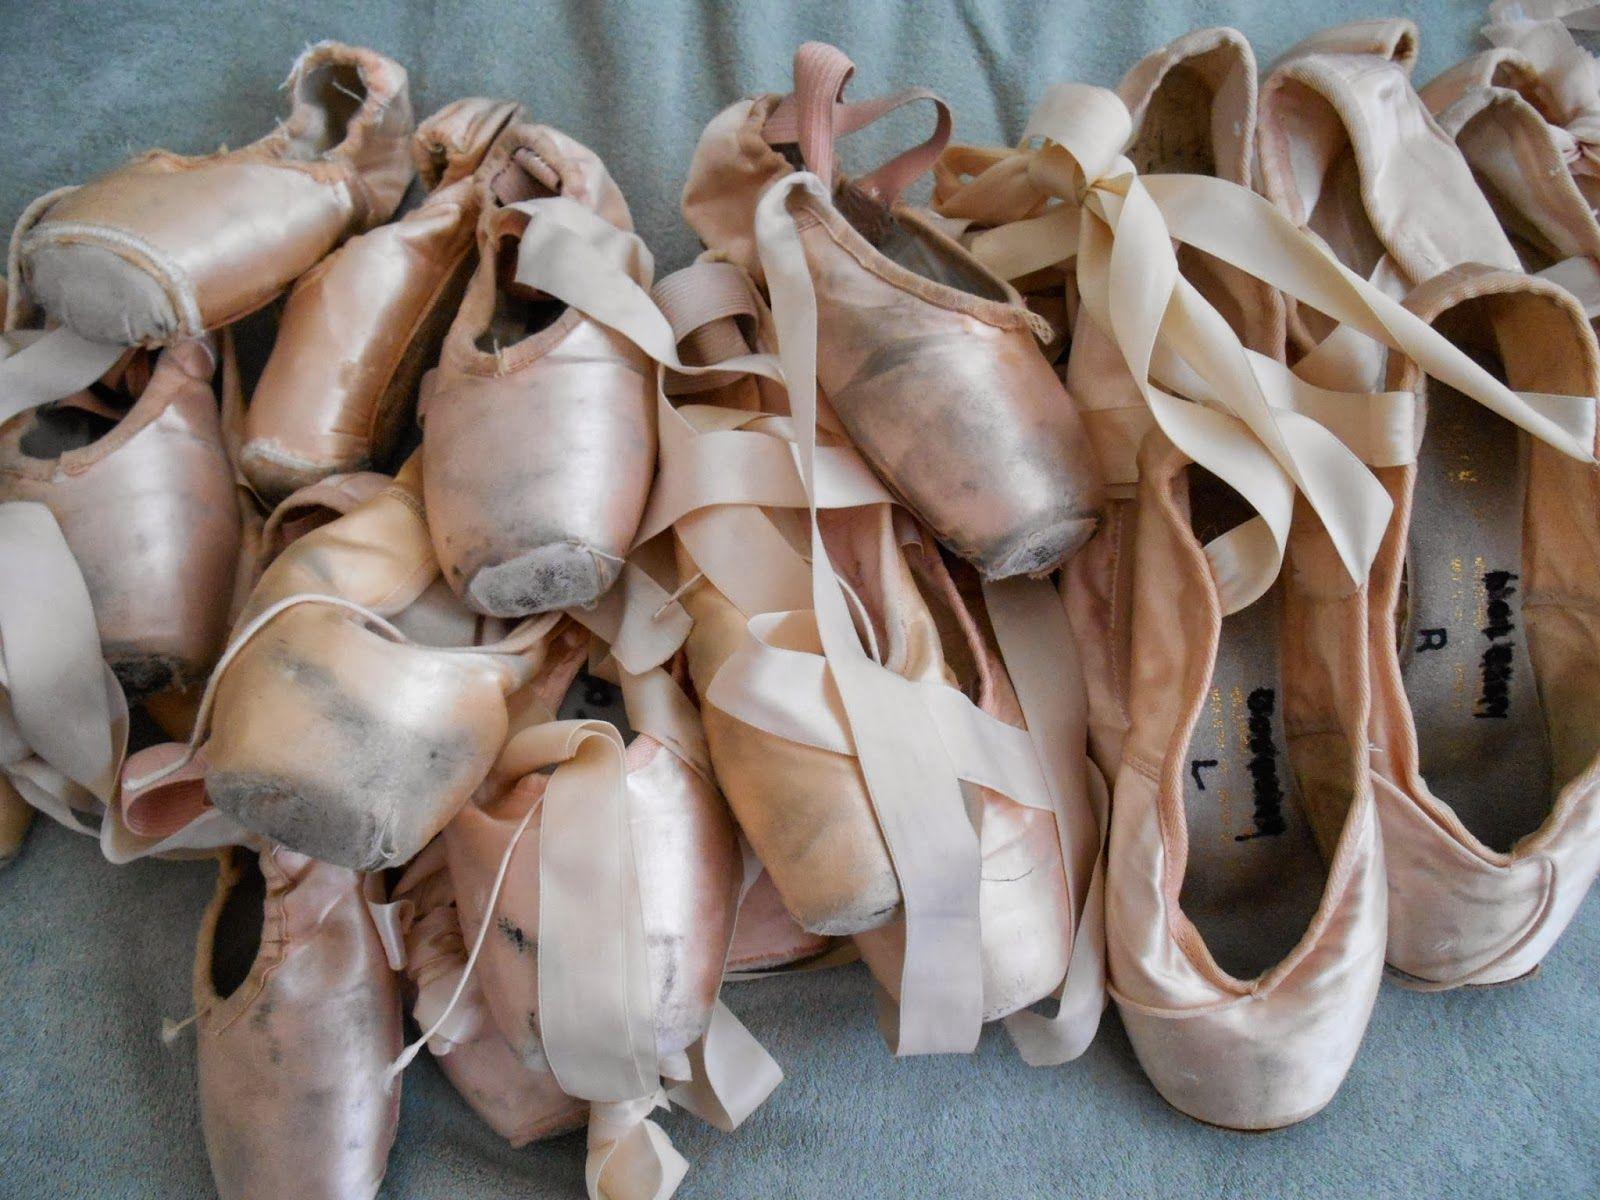 Pointe Shoes Wallpapers - Wallpaper Cave